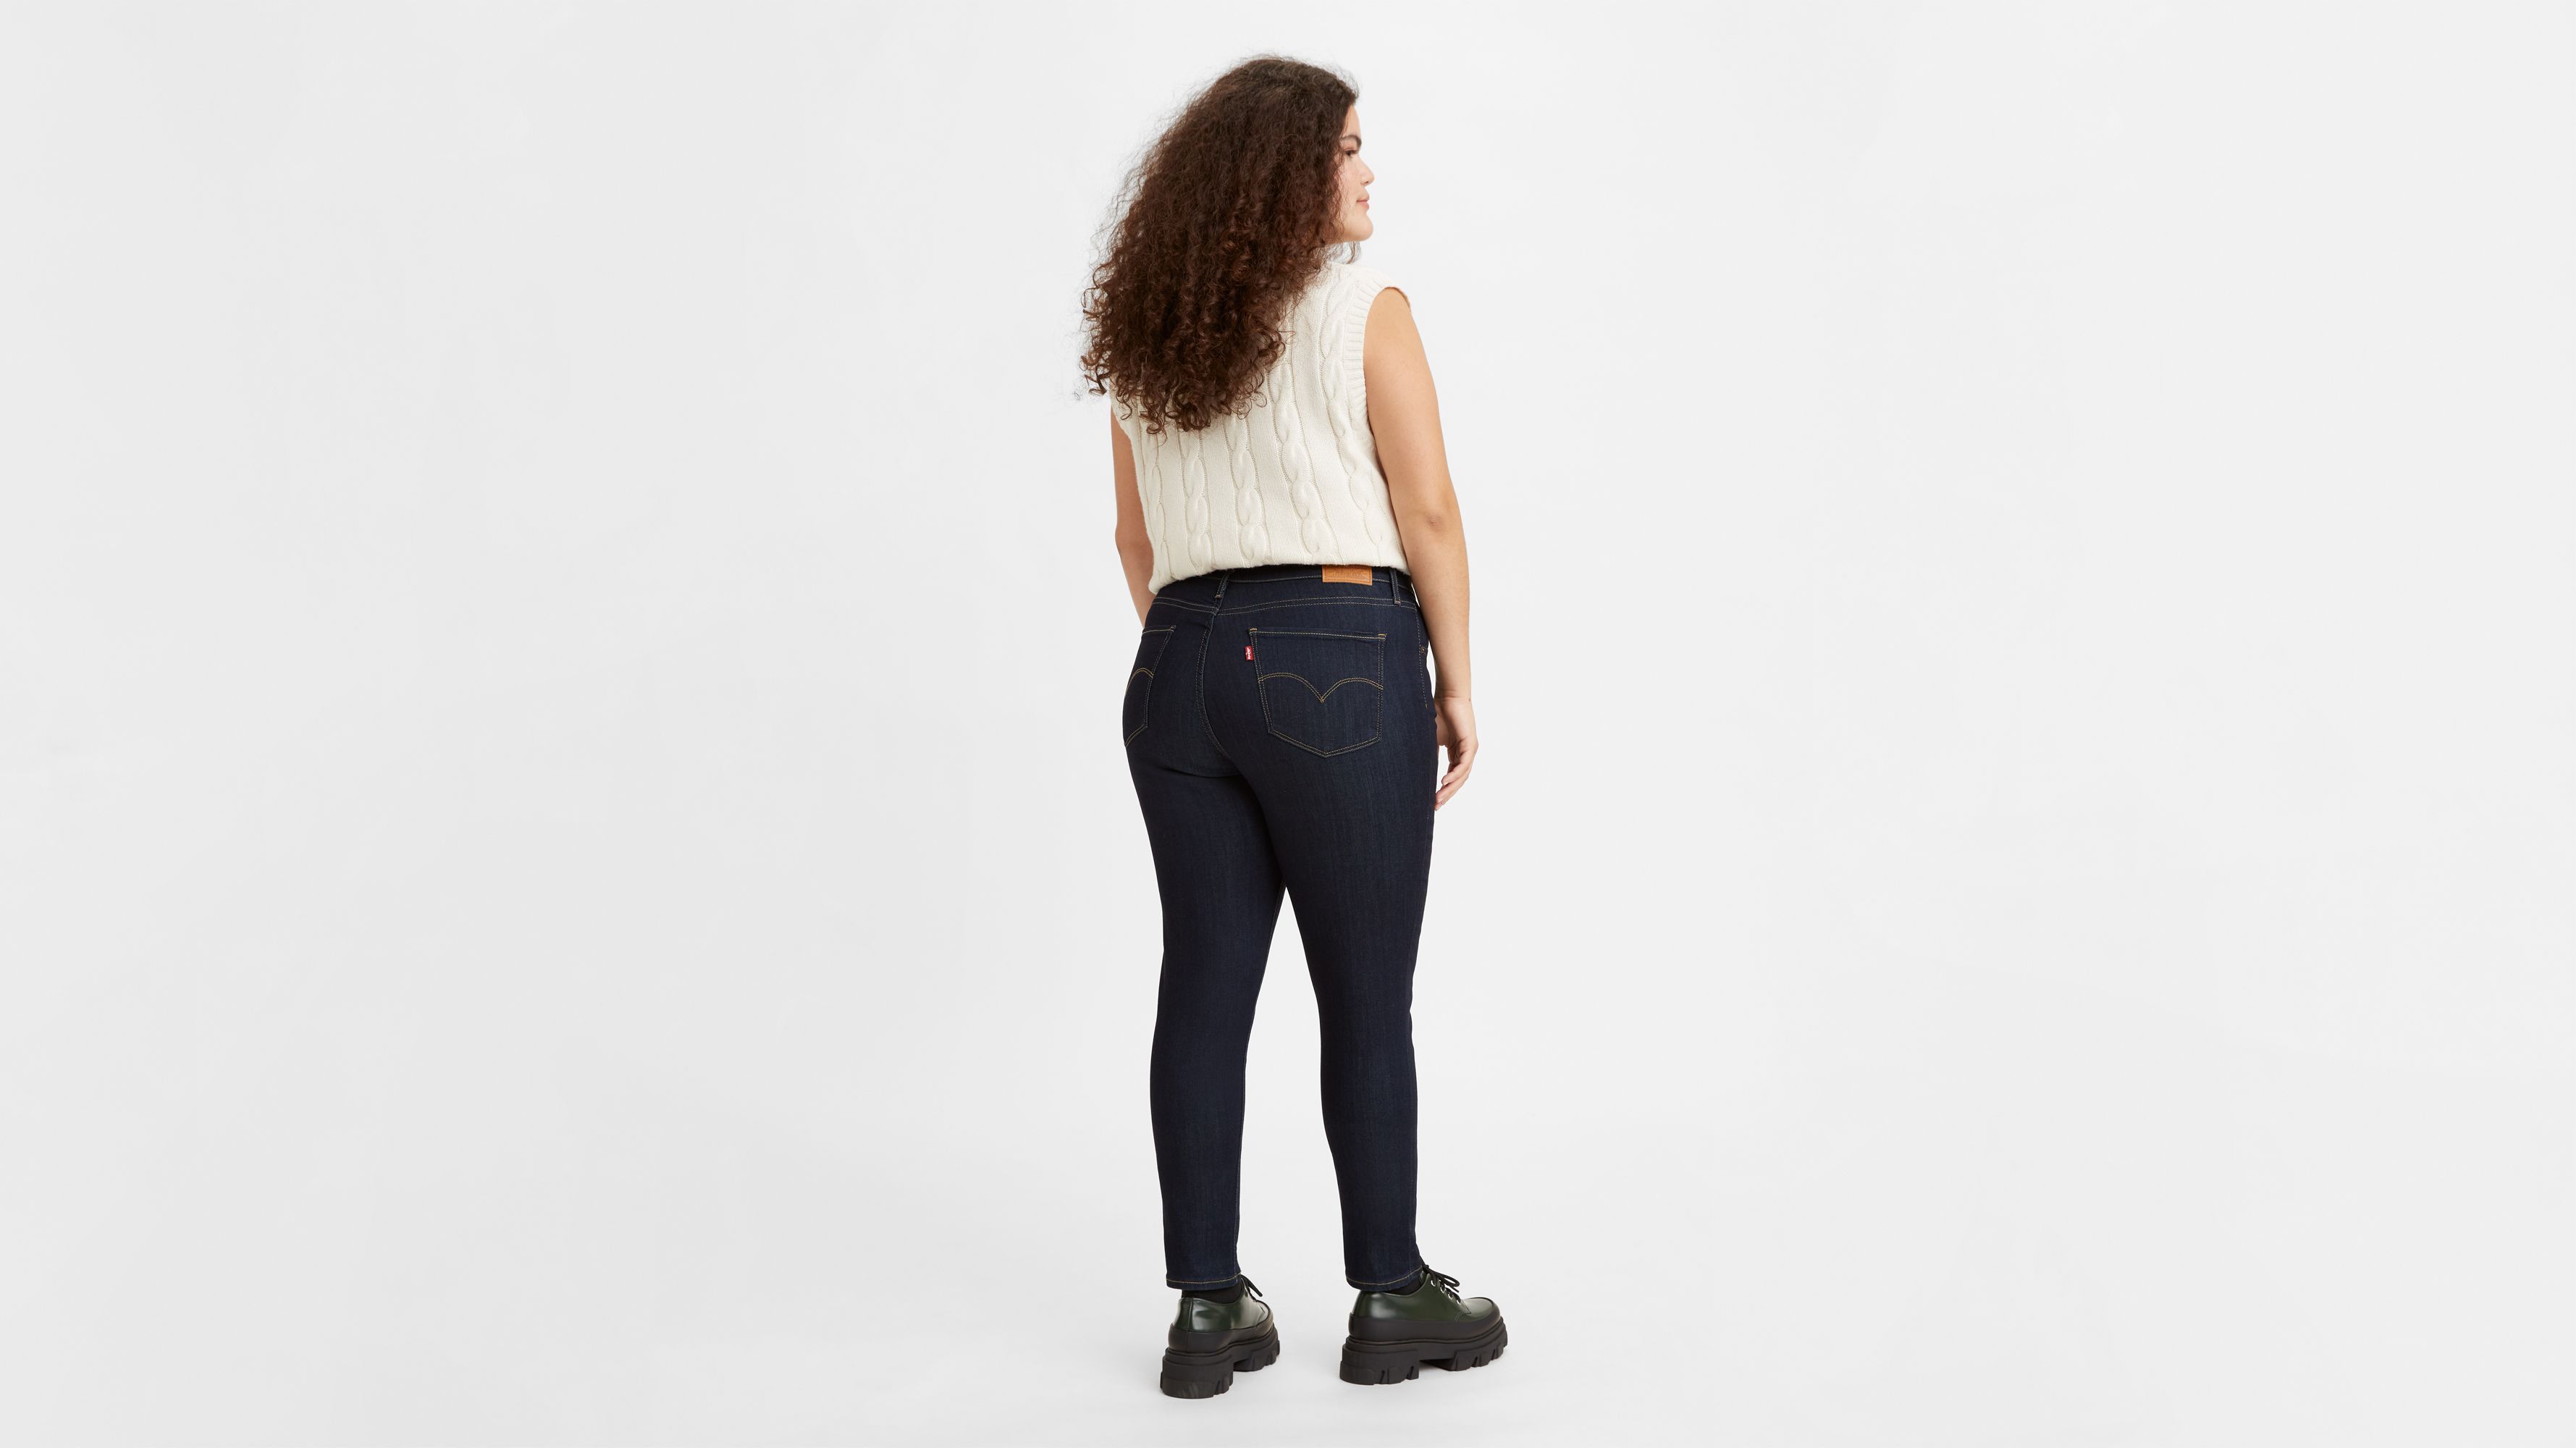 levis jeans 721 high rise skinny